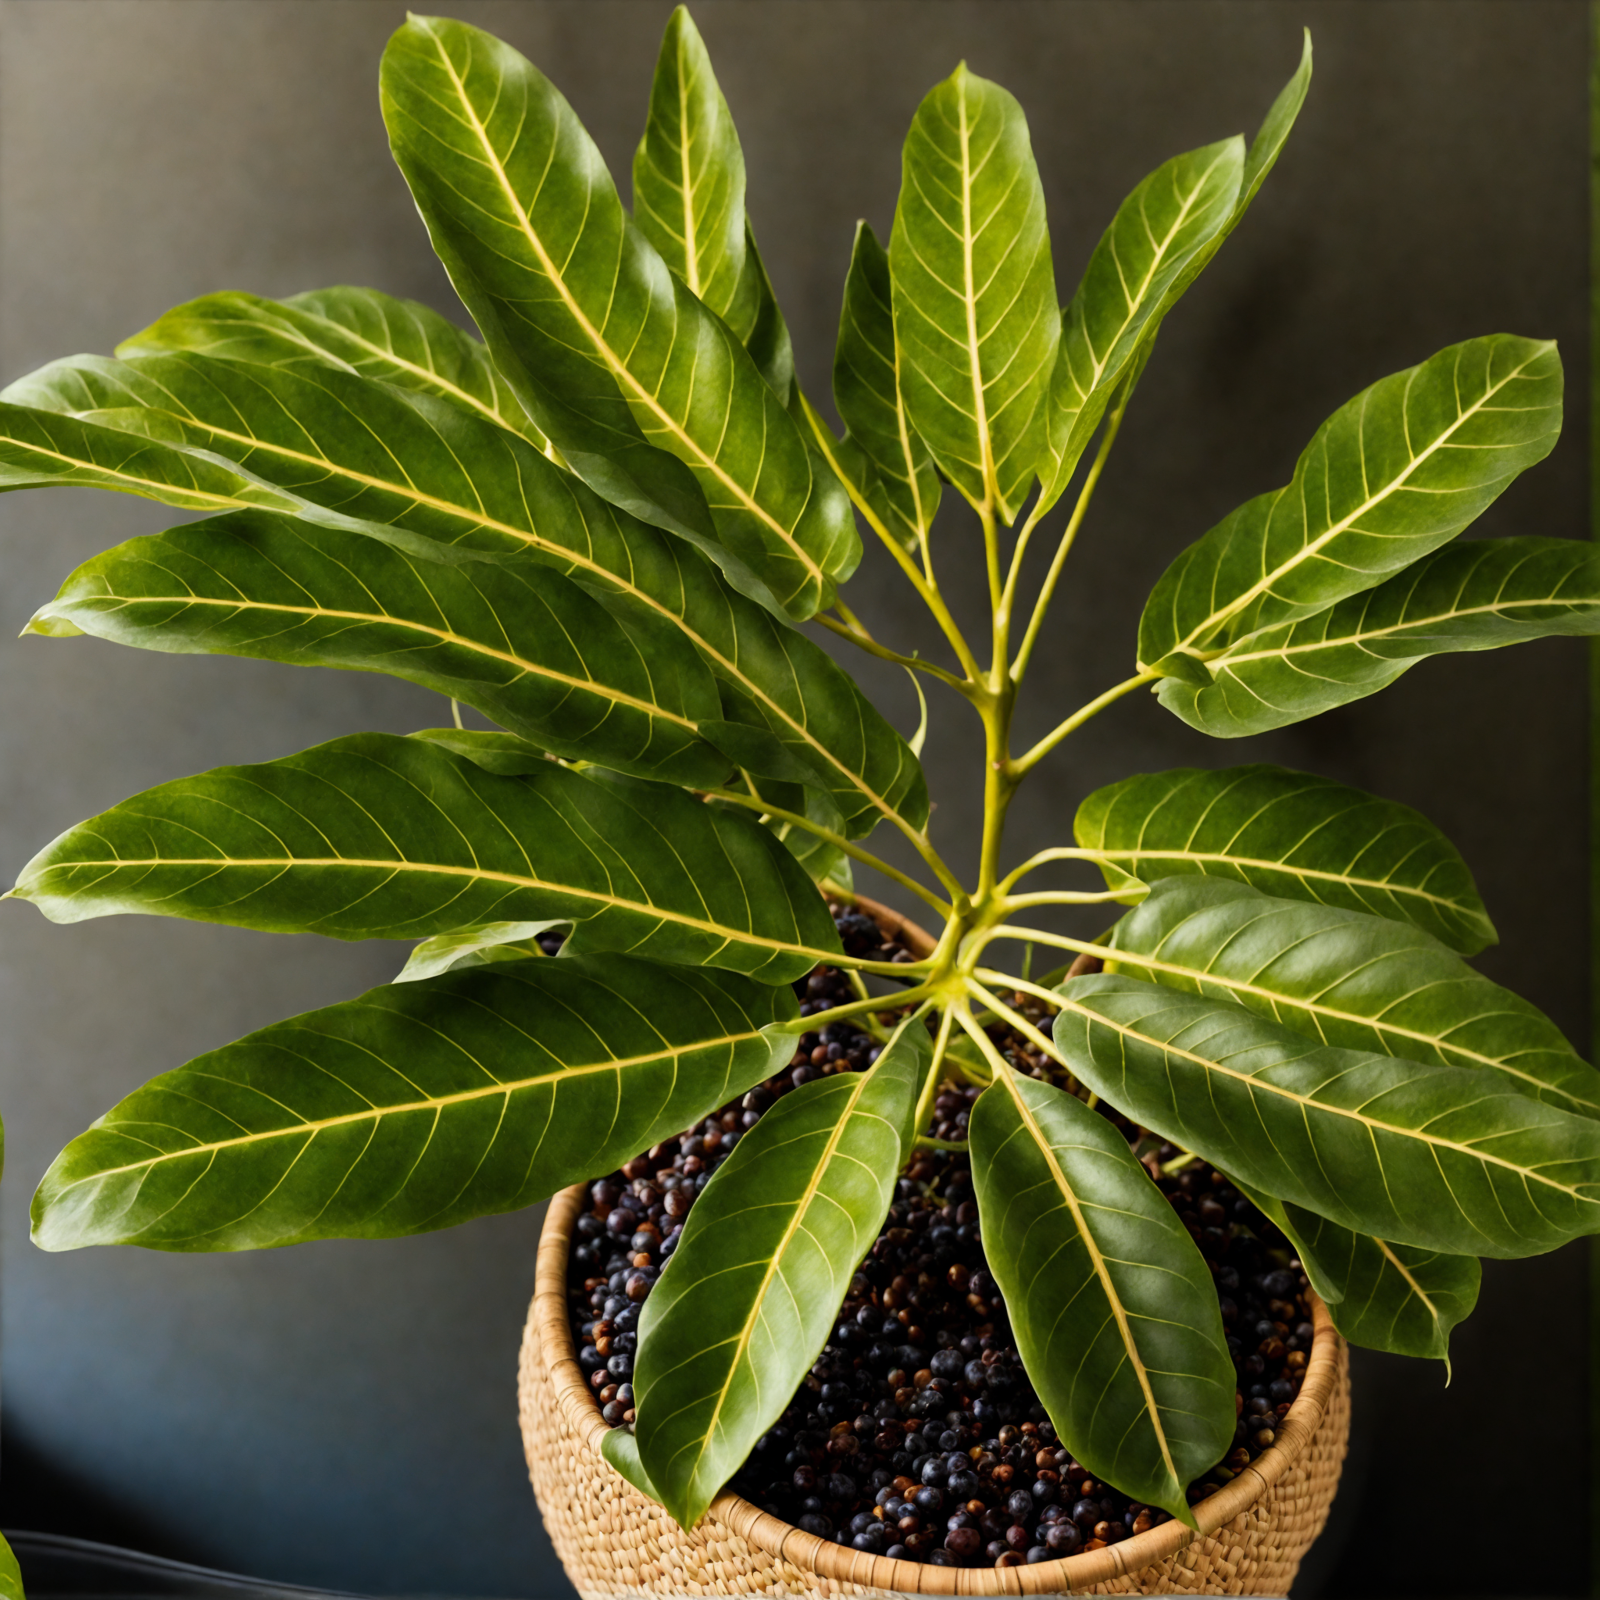 Schefflera actinophylla in a planter, with a leaf detail, against a dark background in a well-lit room.